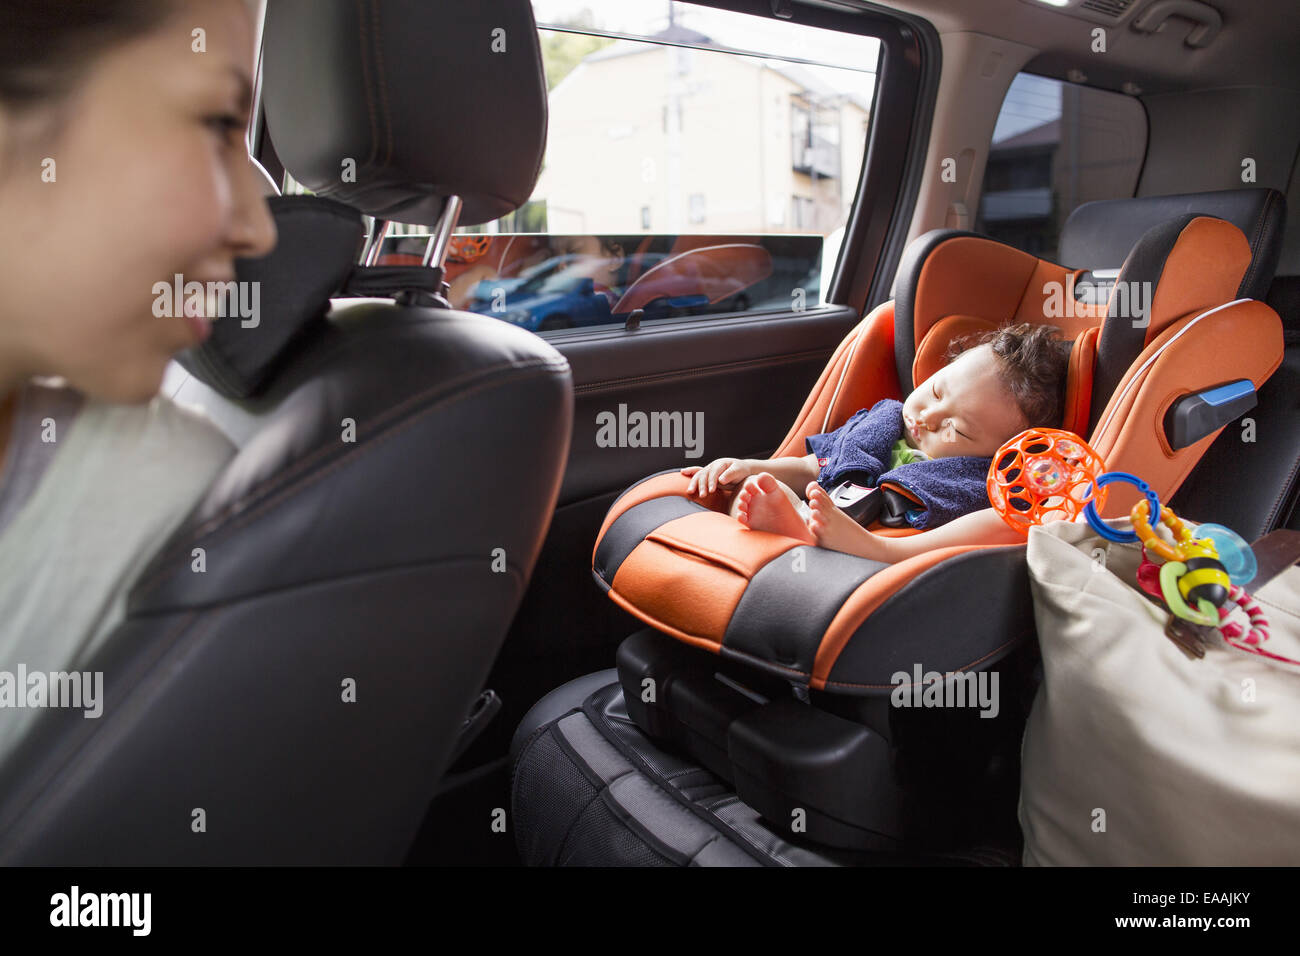 A mother and her young baby boy in a car. Stock Photo